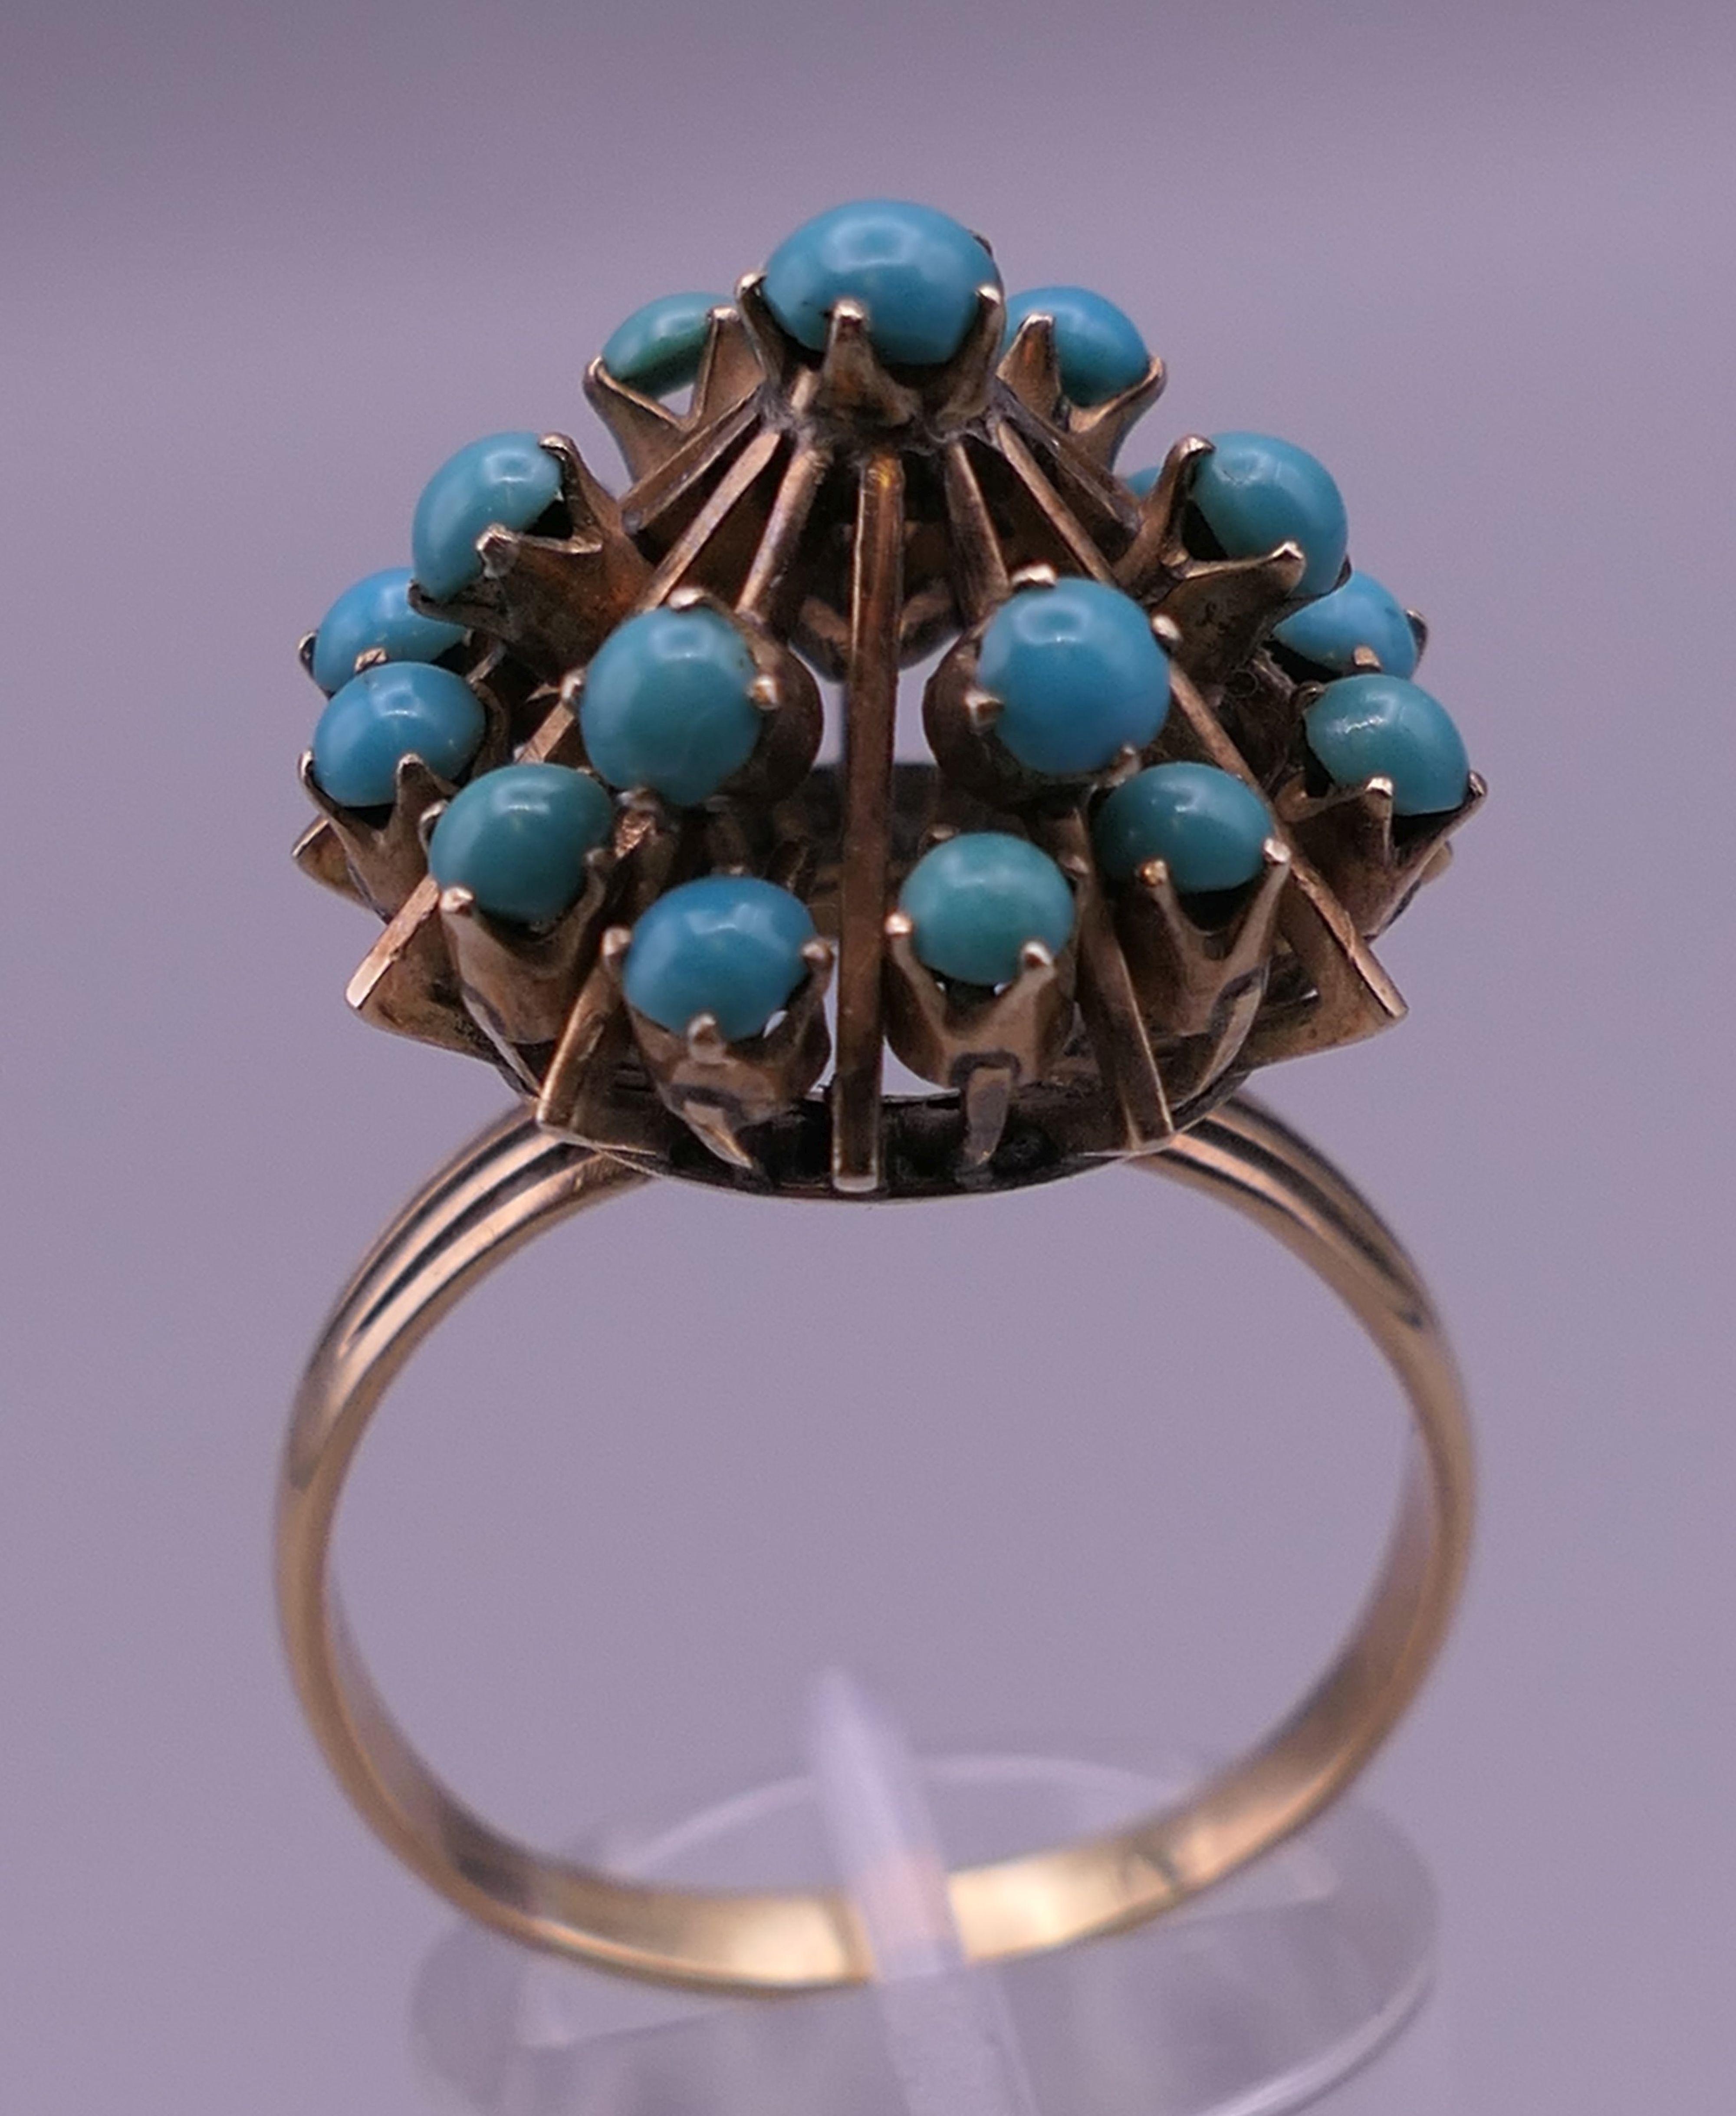 A 14 K gold and turquoise ring. Ring size U. 7.5 grammes total weight. - Image 3 of 8